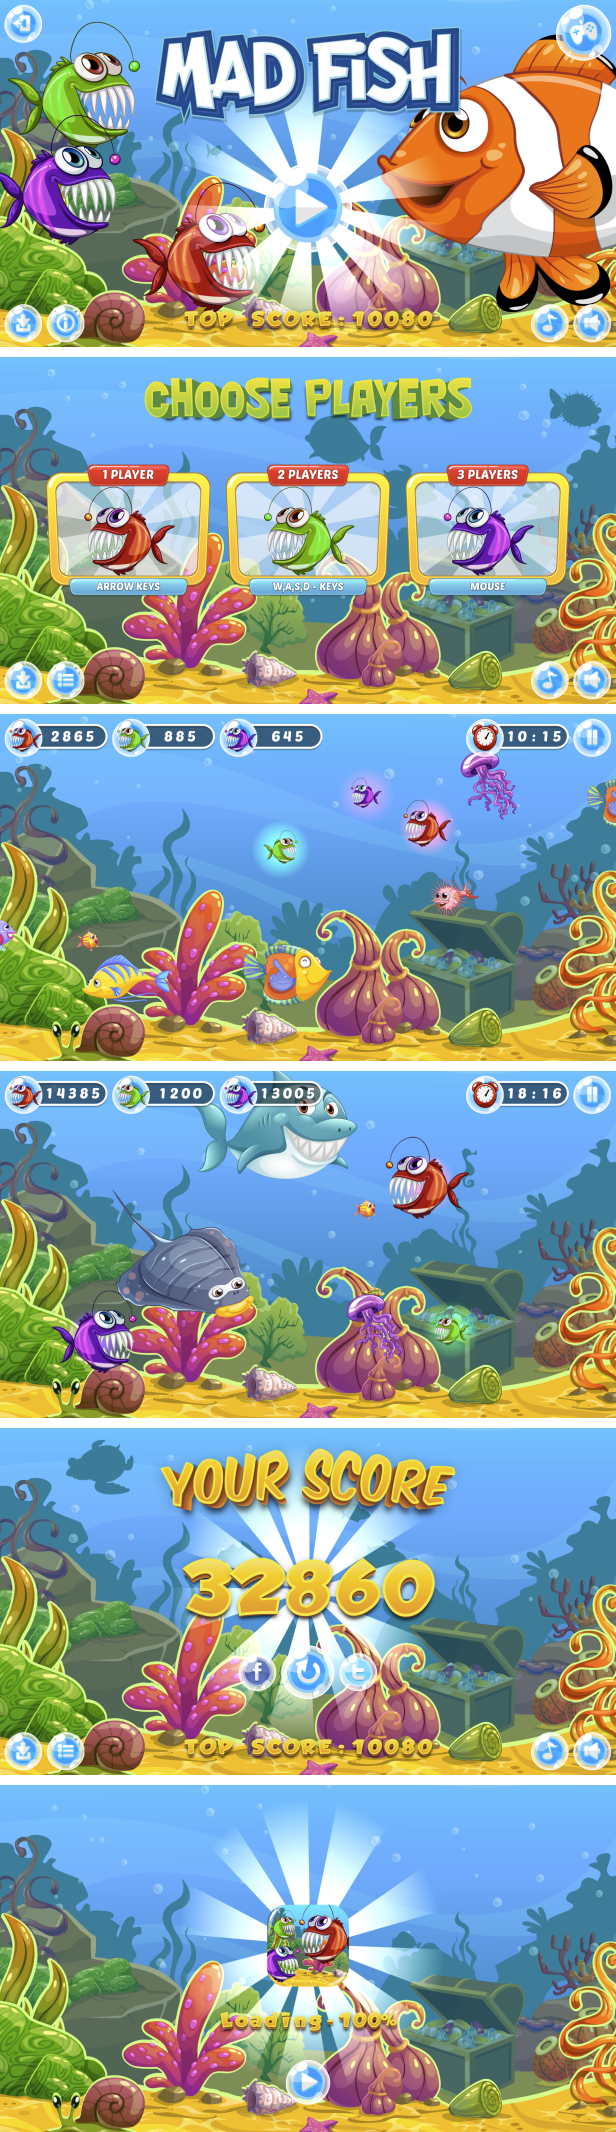 Mad Fish - HTML5 Game, Mobile Version + AdMob!!! (Construct 3 | Construct 2 | Capx) - 3